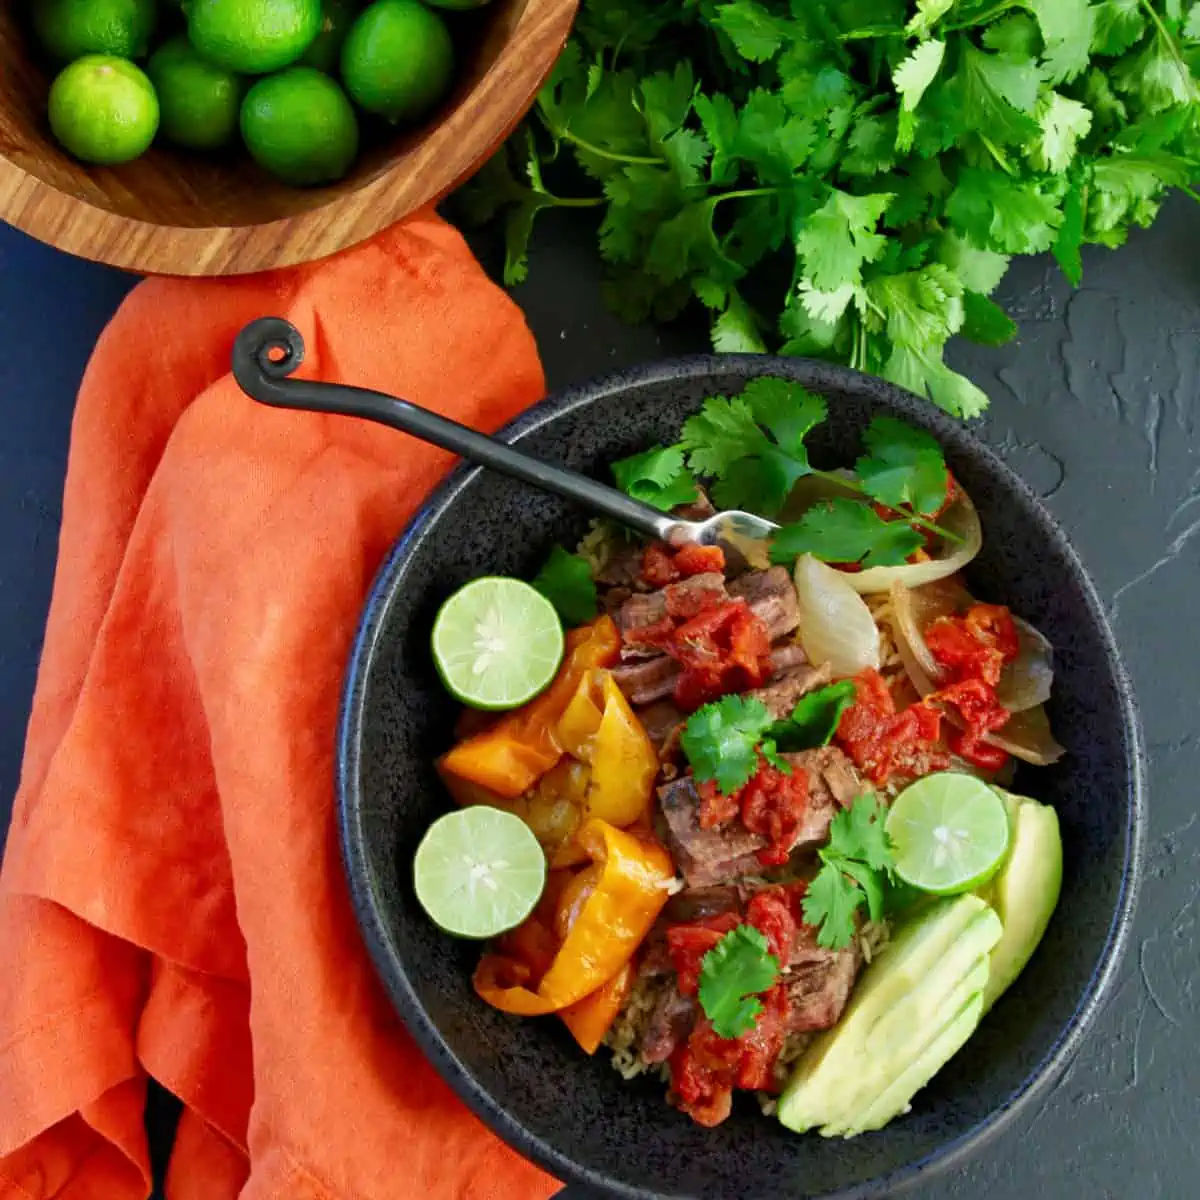 A table with a black bowl filled with shredded beef on rice with onions and bell peppers garnished with limes, avocado, and cilantro.